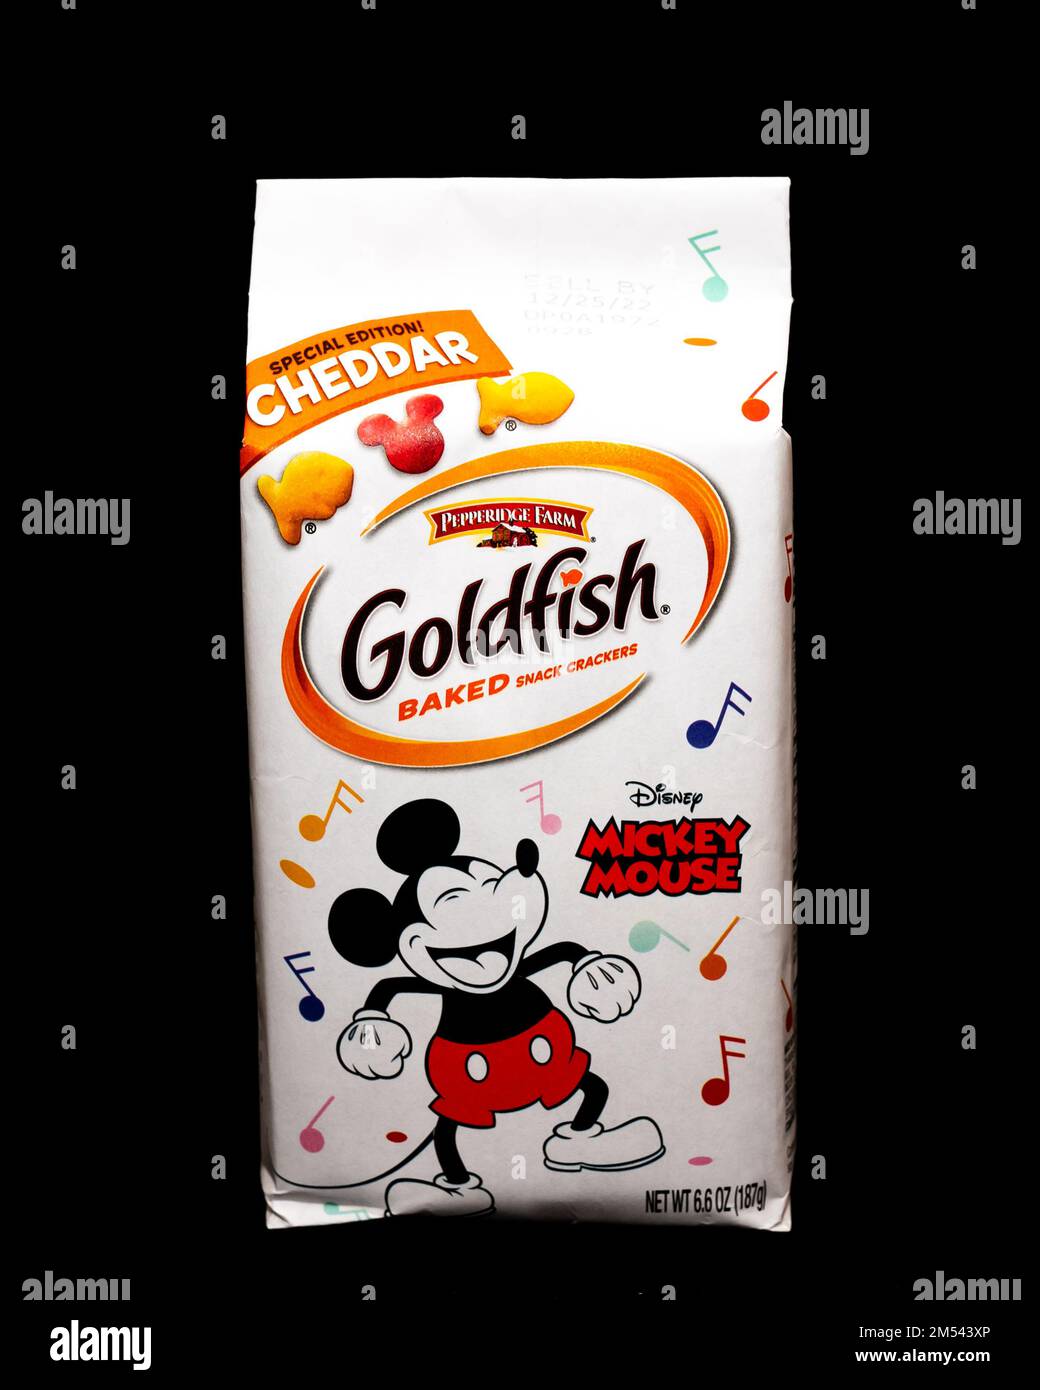 A Special Edition bag of Pepperidge Farm Goldfish, a cheddar cheese baked snack cracker made with real cheese featuring Disney Micky Mouse Stock Photo